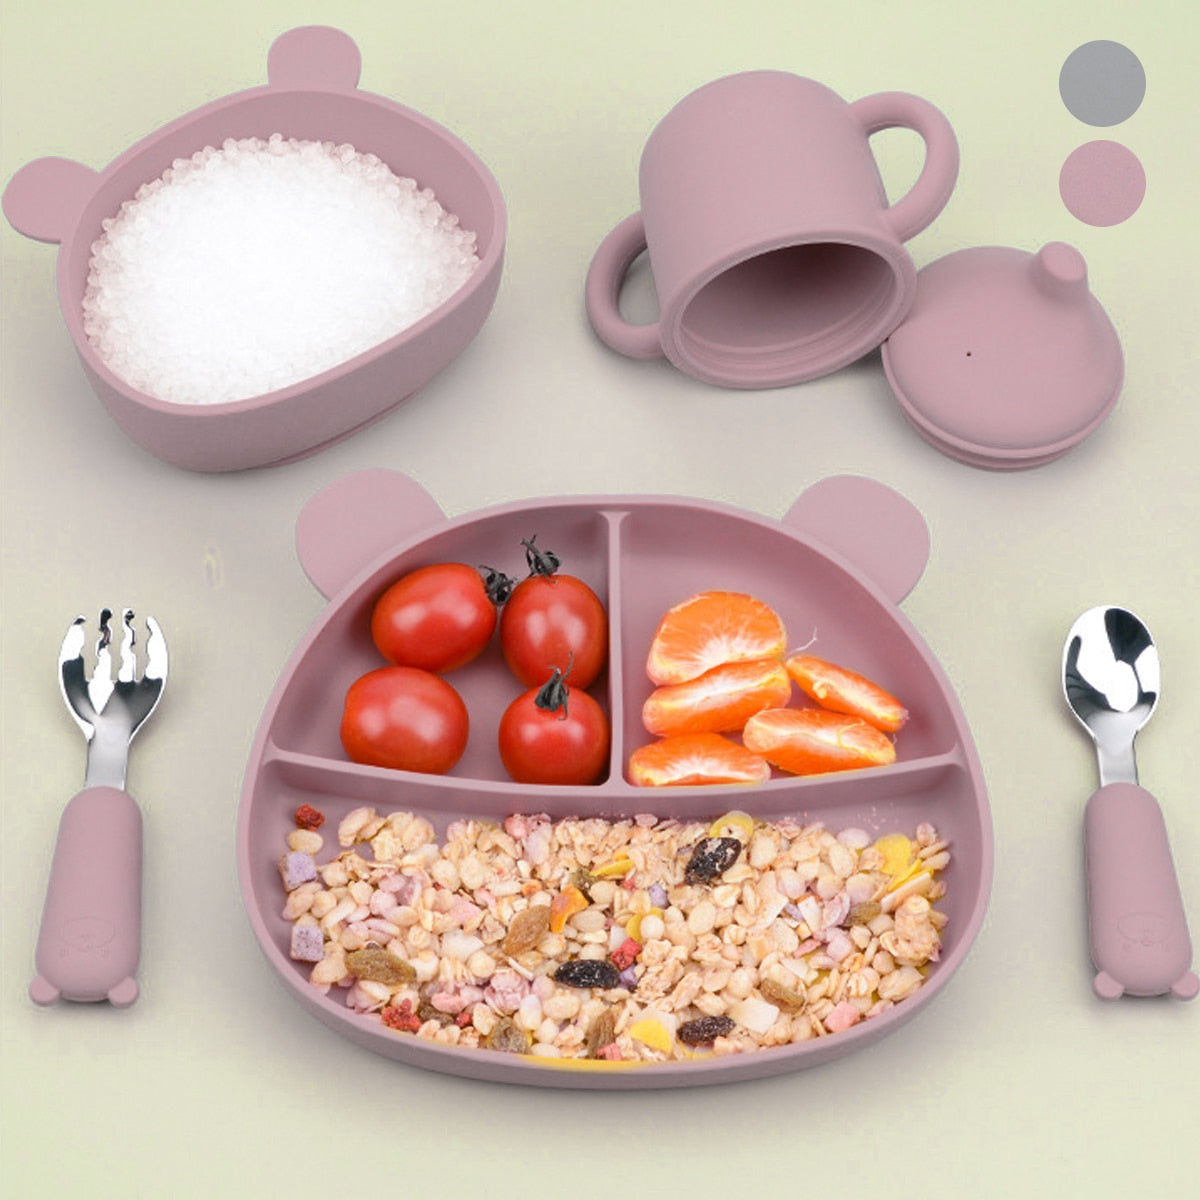 5Pcs Set Bowls Plates Spoons Silicone Suction Feeding Food Tableware Non-slip Baby Cutlery Set Food Feeding Bowl for Kids